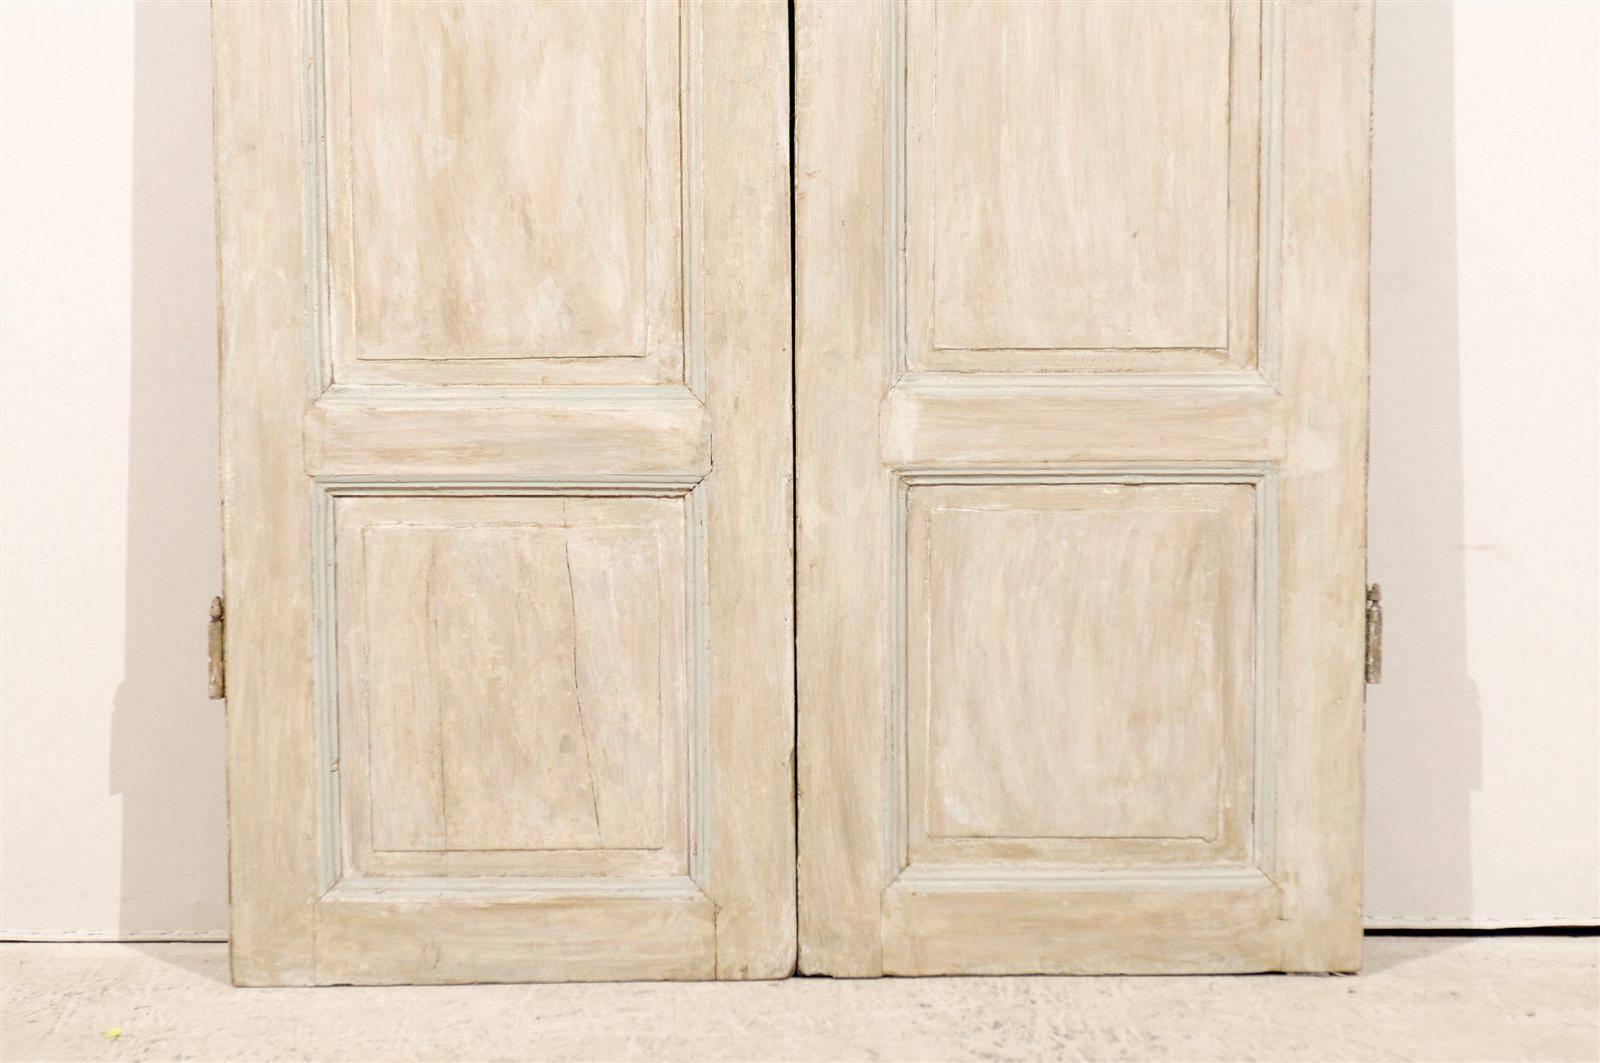 Pair of Tall French Doors from the Mid-19th Century (Holz)